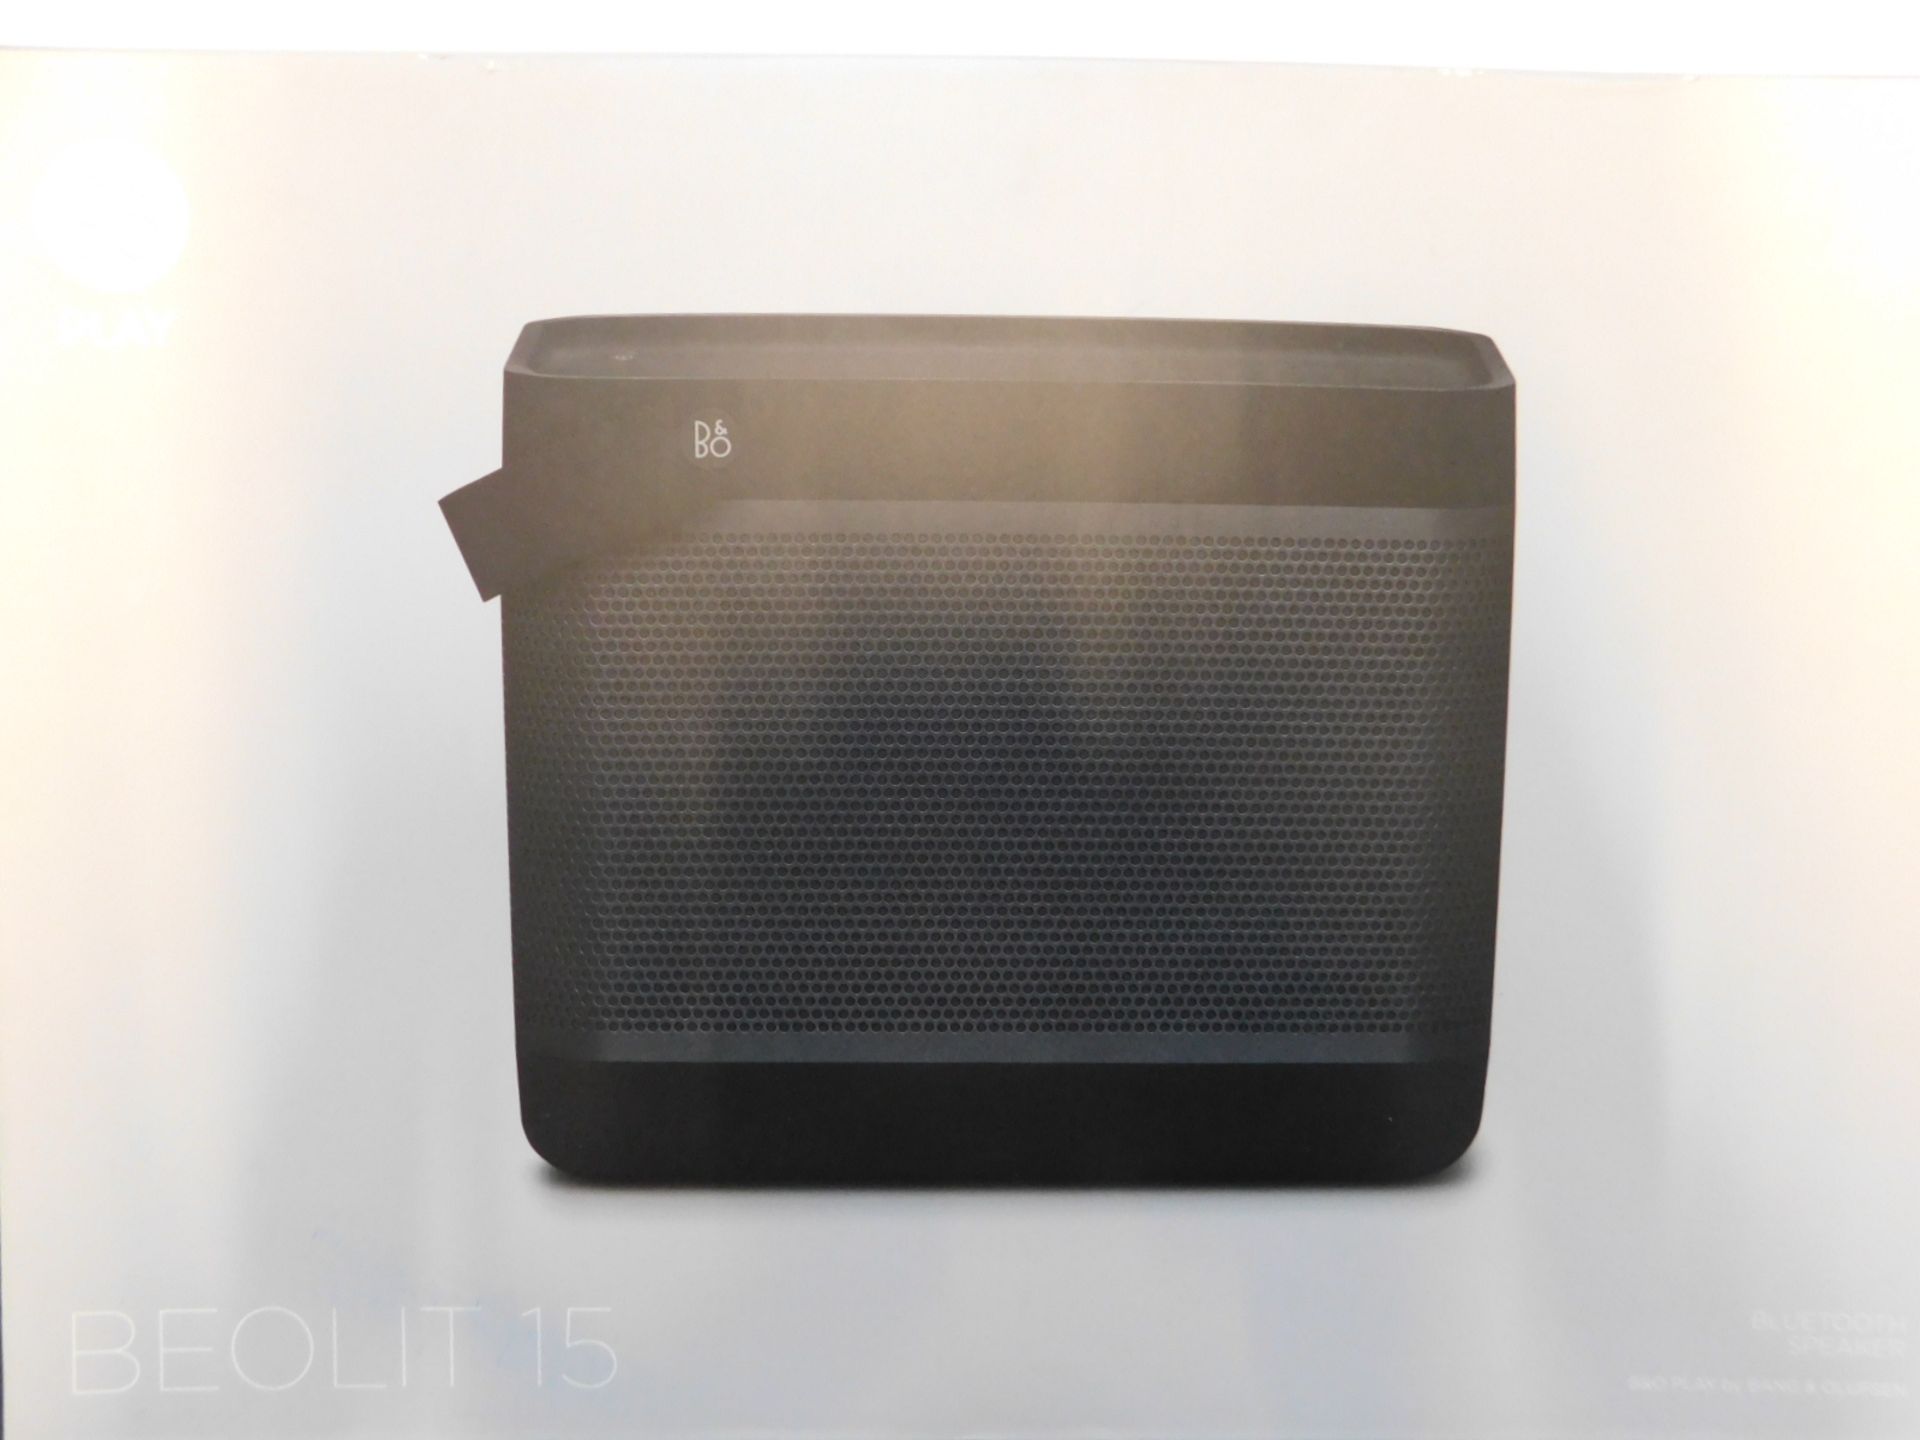 1 BOXED BANG AND OLUFSEN BEOLIT15 BLUETOOTH SPEAKER IN BLACK RRP £449